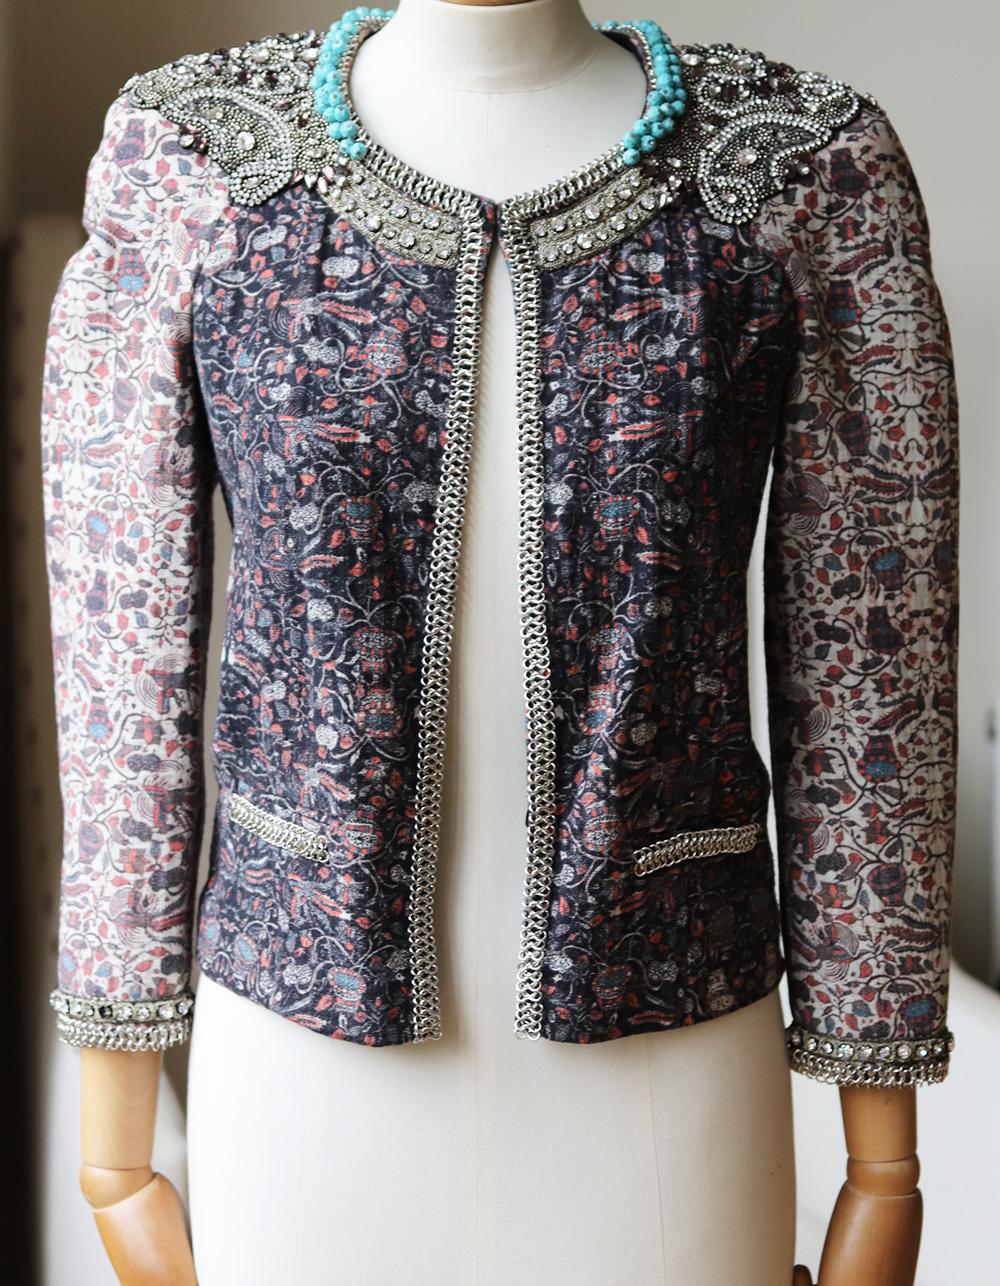 Steeped in Parisian charm but with a signature quirky twist, Isabel Marant's expertly embellished cotton jacket is the ultimate trophy coverup.
Show off this sensational crystal and bead-trimmed piece over your favourite dress, or a pair of jeans